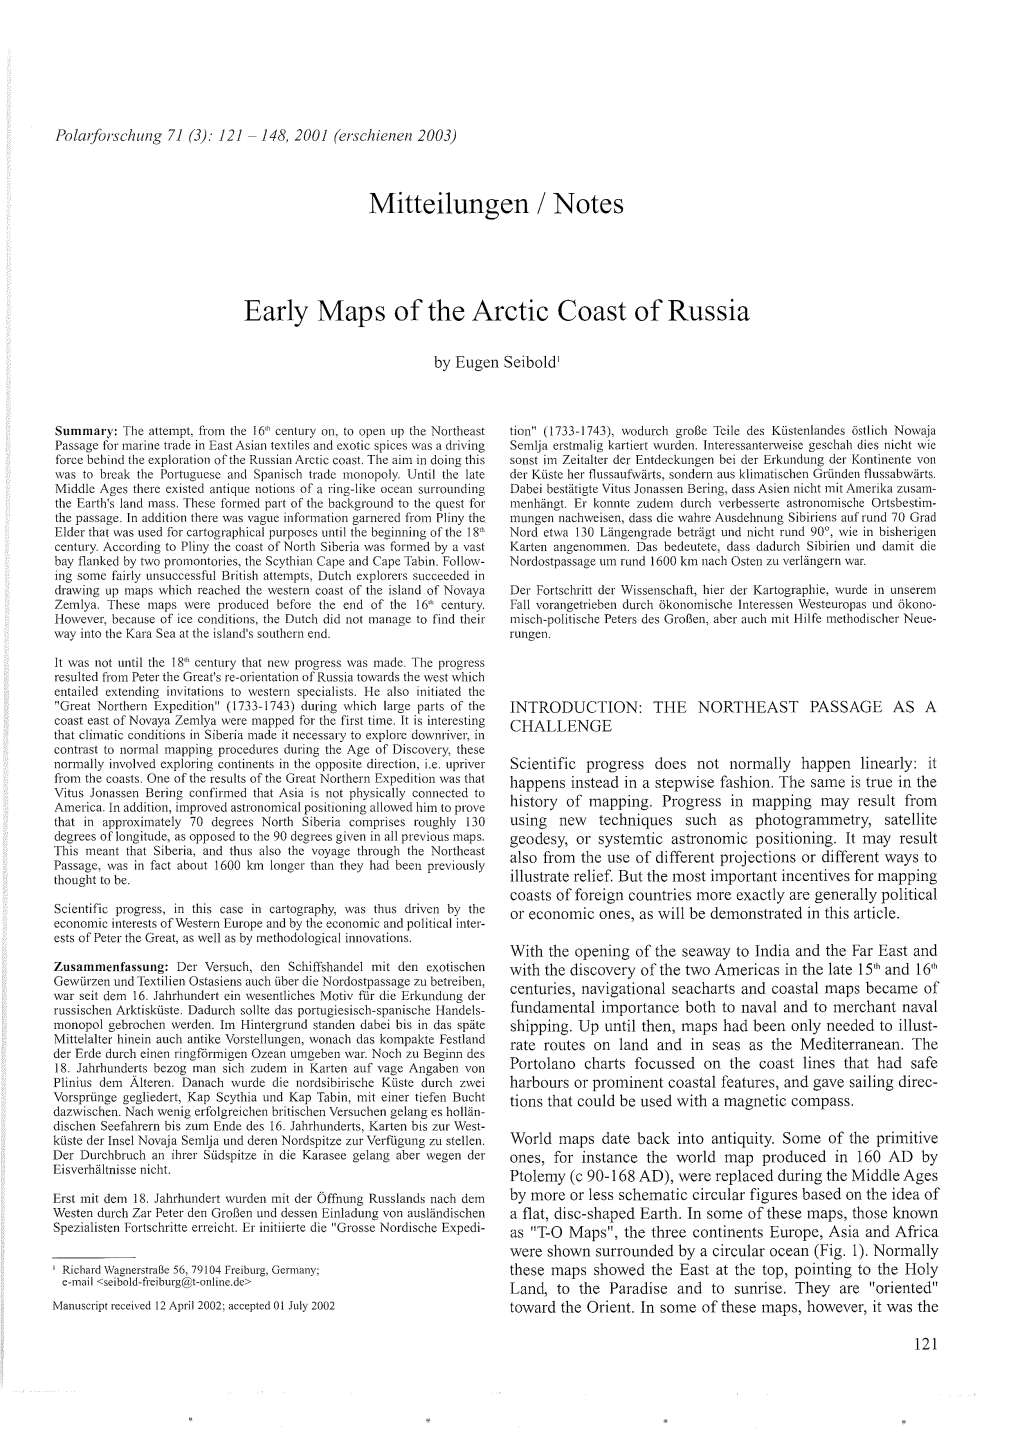 Mitteilungen / Notes Early Maps of the Arctic Coast of Russia